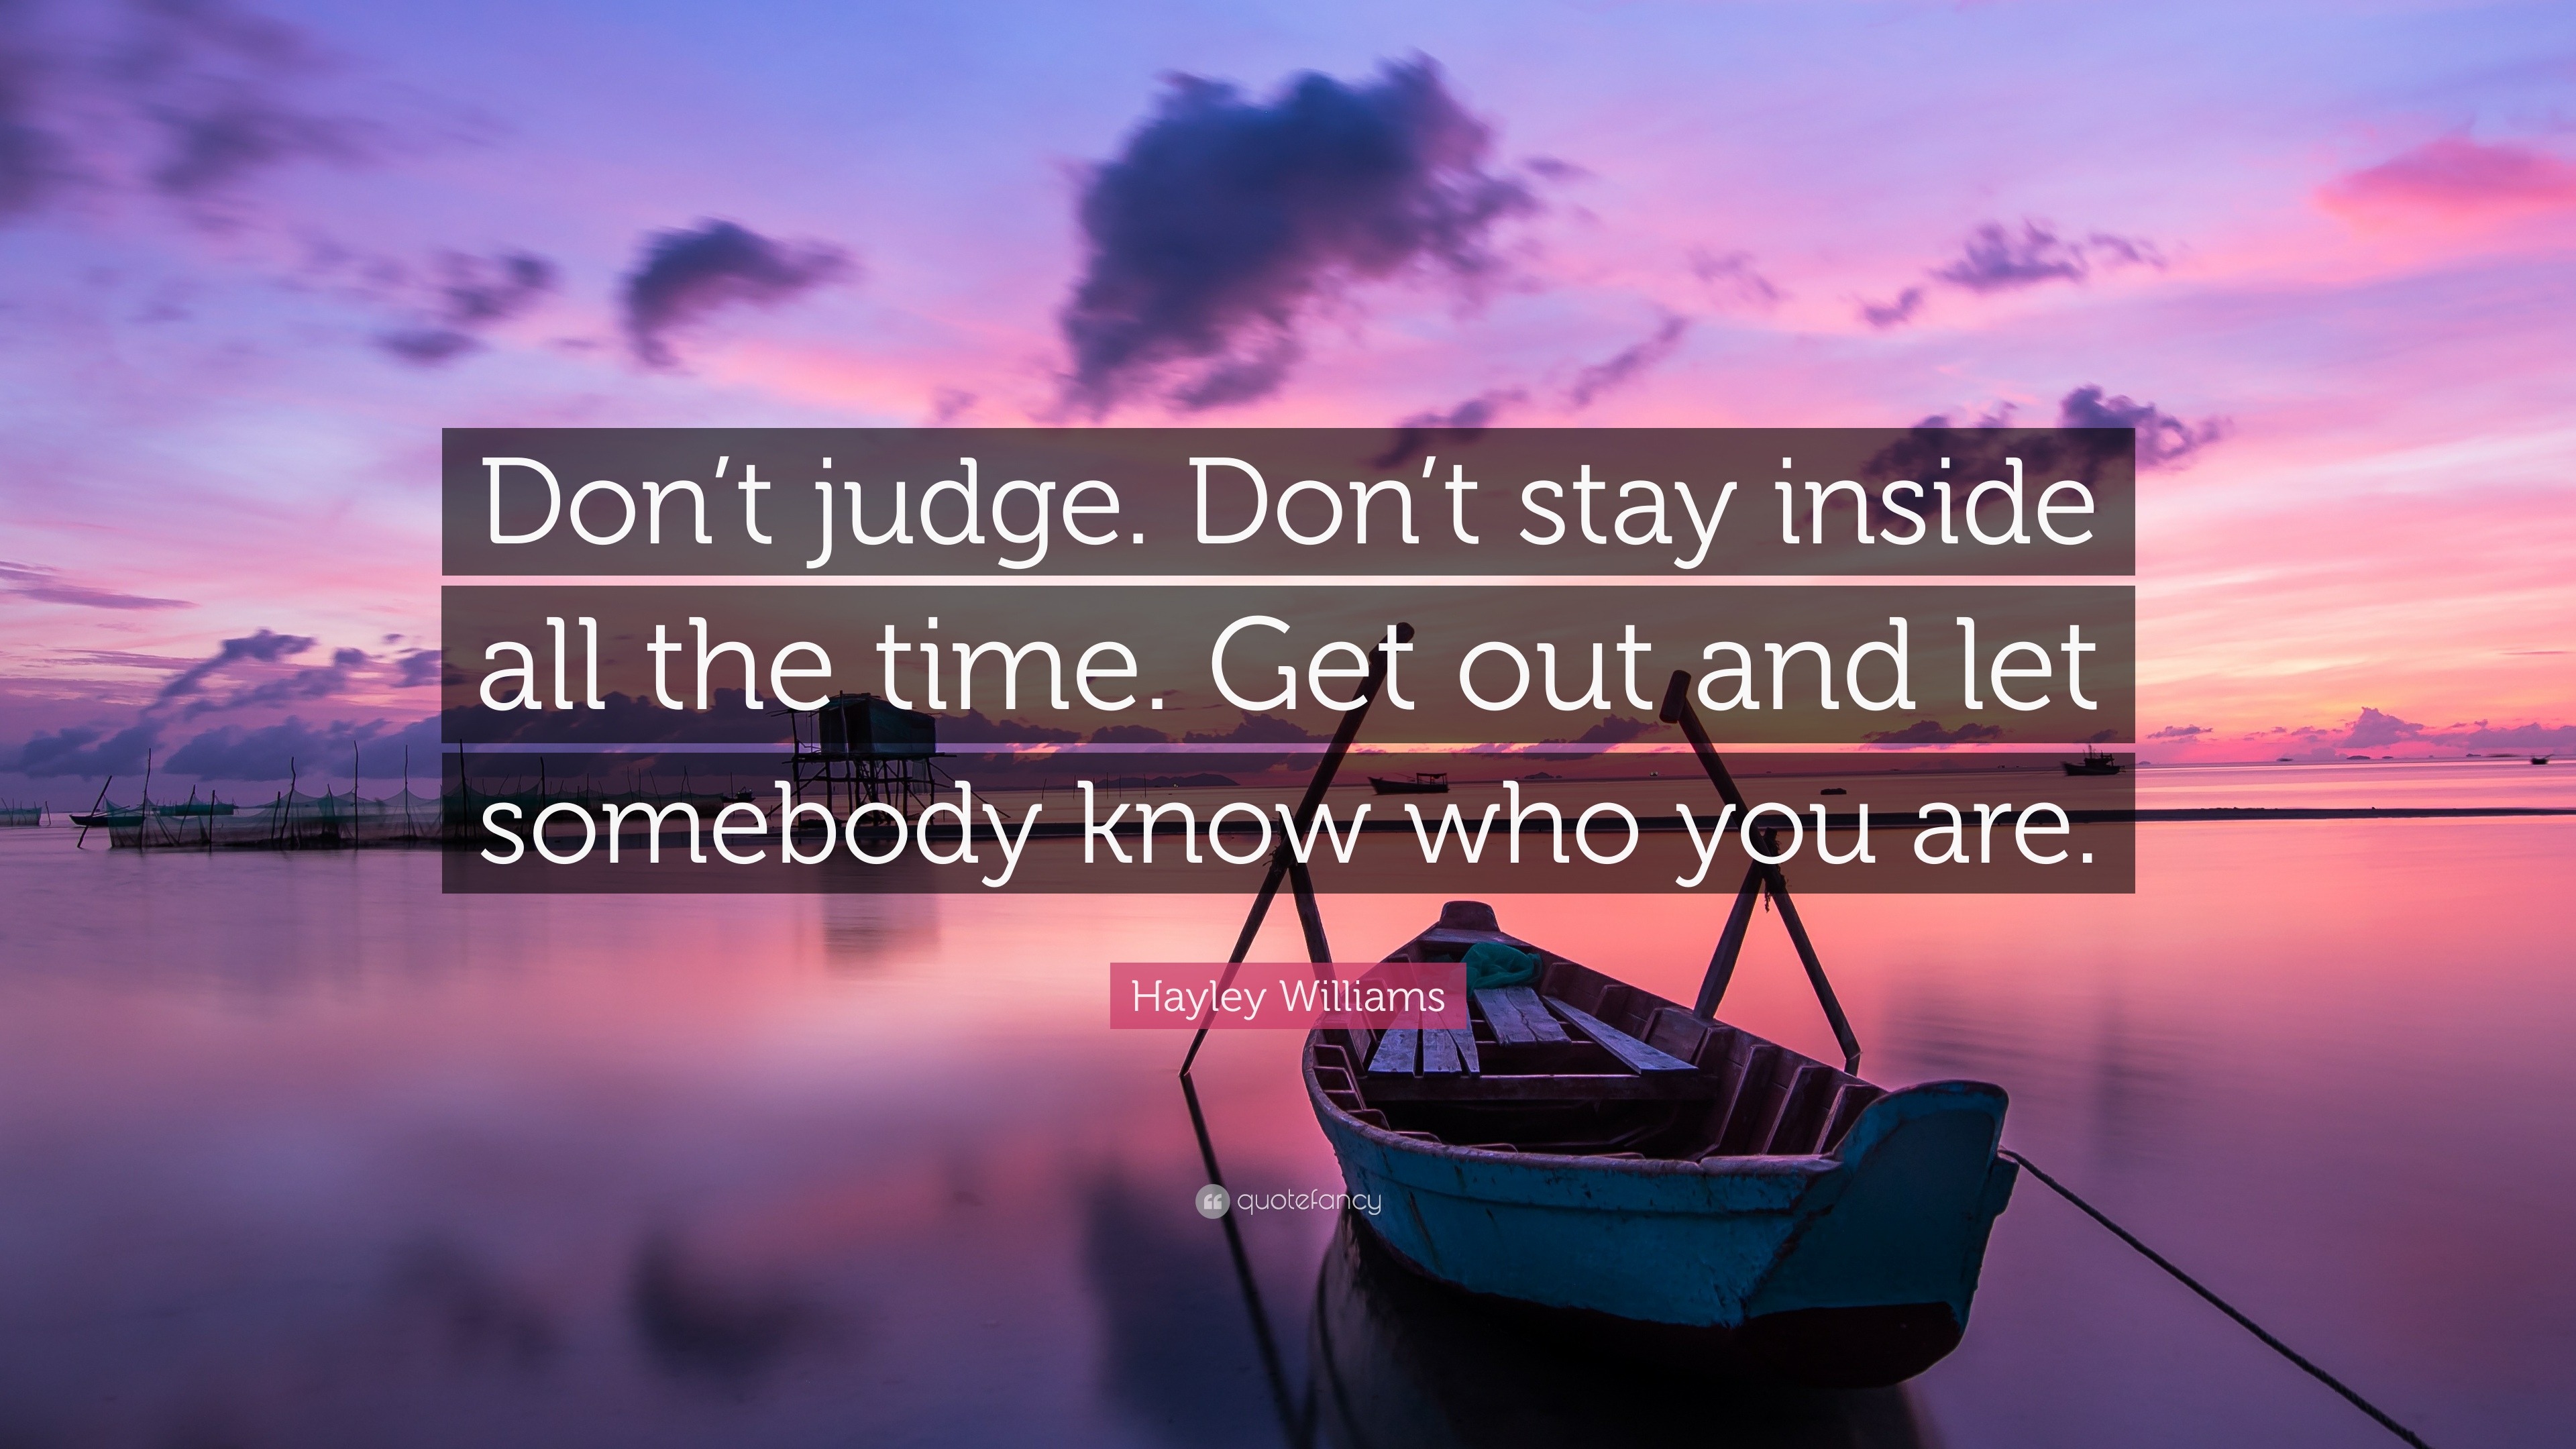 Hayley Williams Quote: “Don’t judge. Don’t stay inside all the time ...